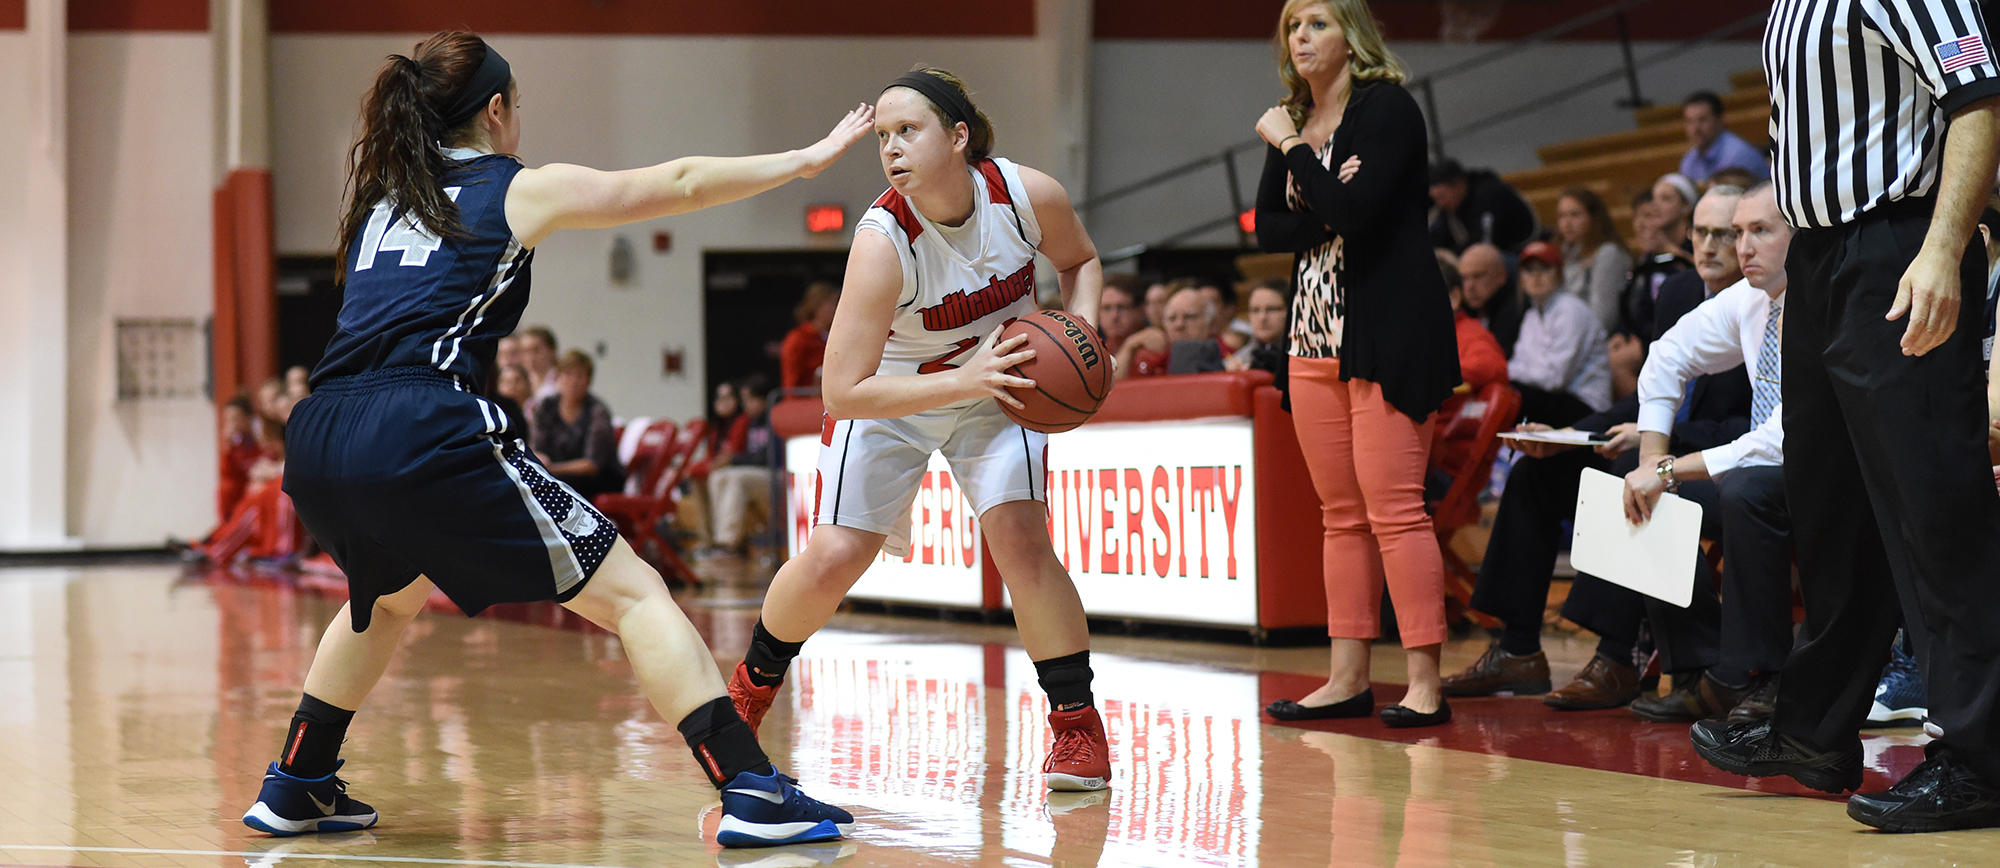 Becca Ziska came up big from behind the three-point line all day for the Tigers. File Photo|Nick Falzerano